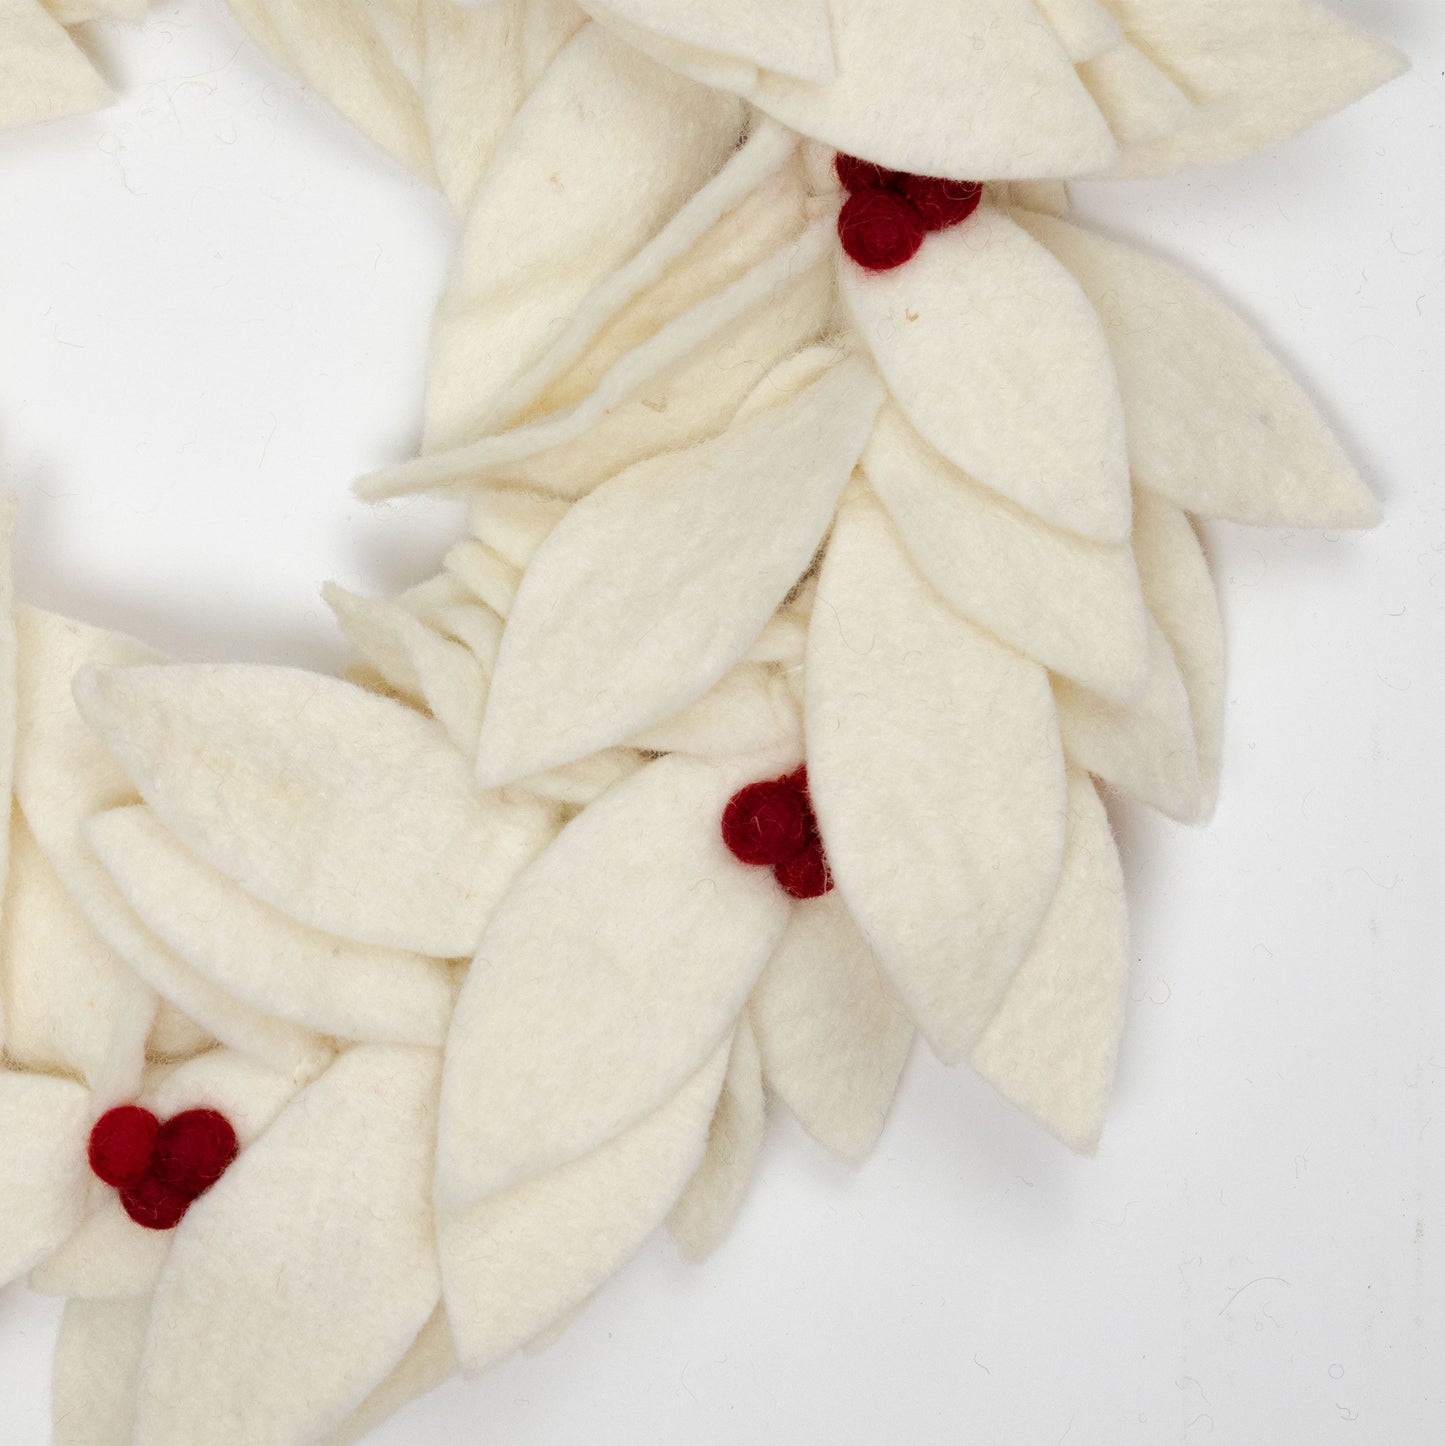 Home Decor - Wreath - White with Red Holly Berries